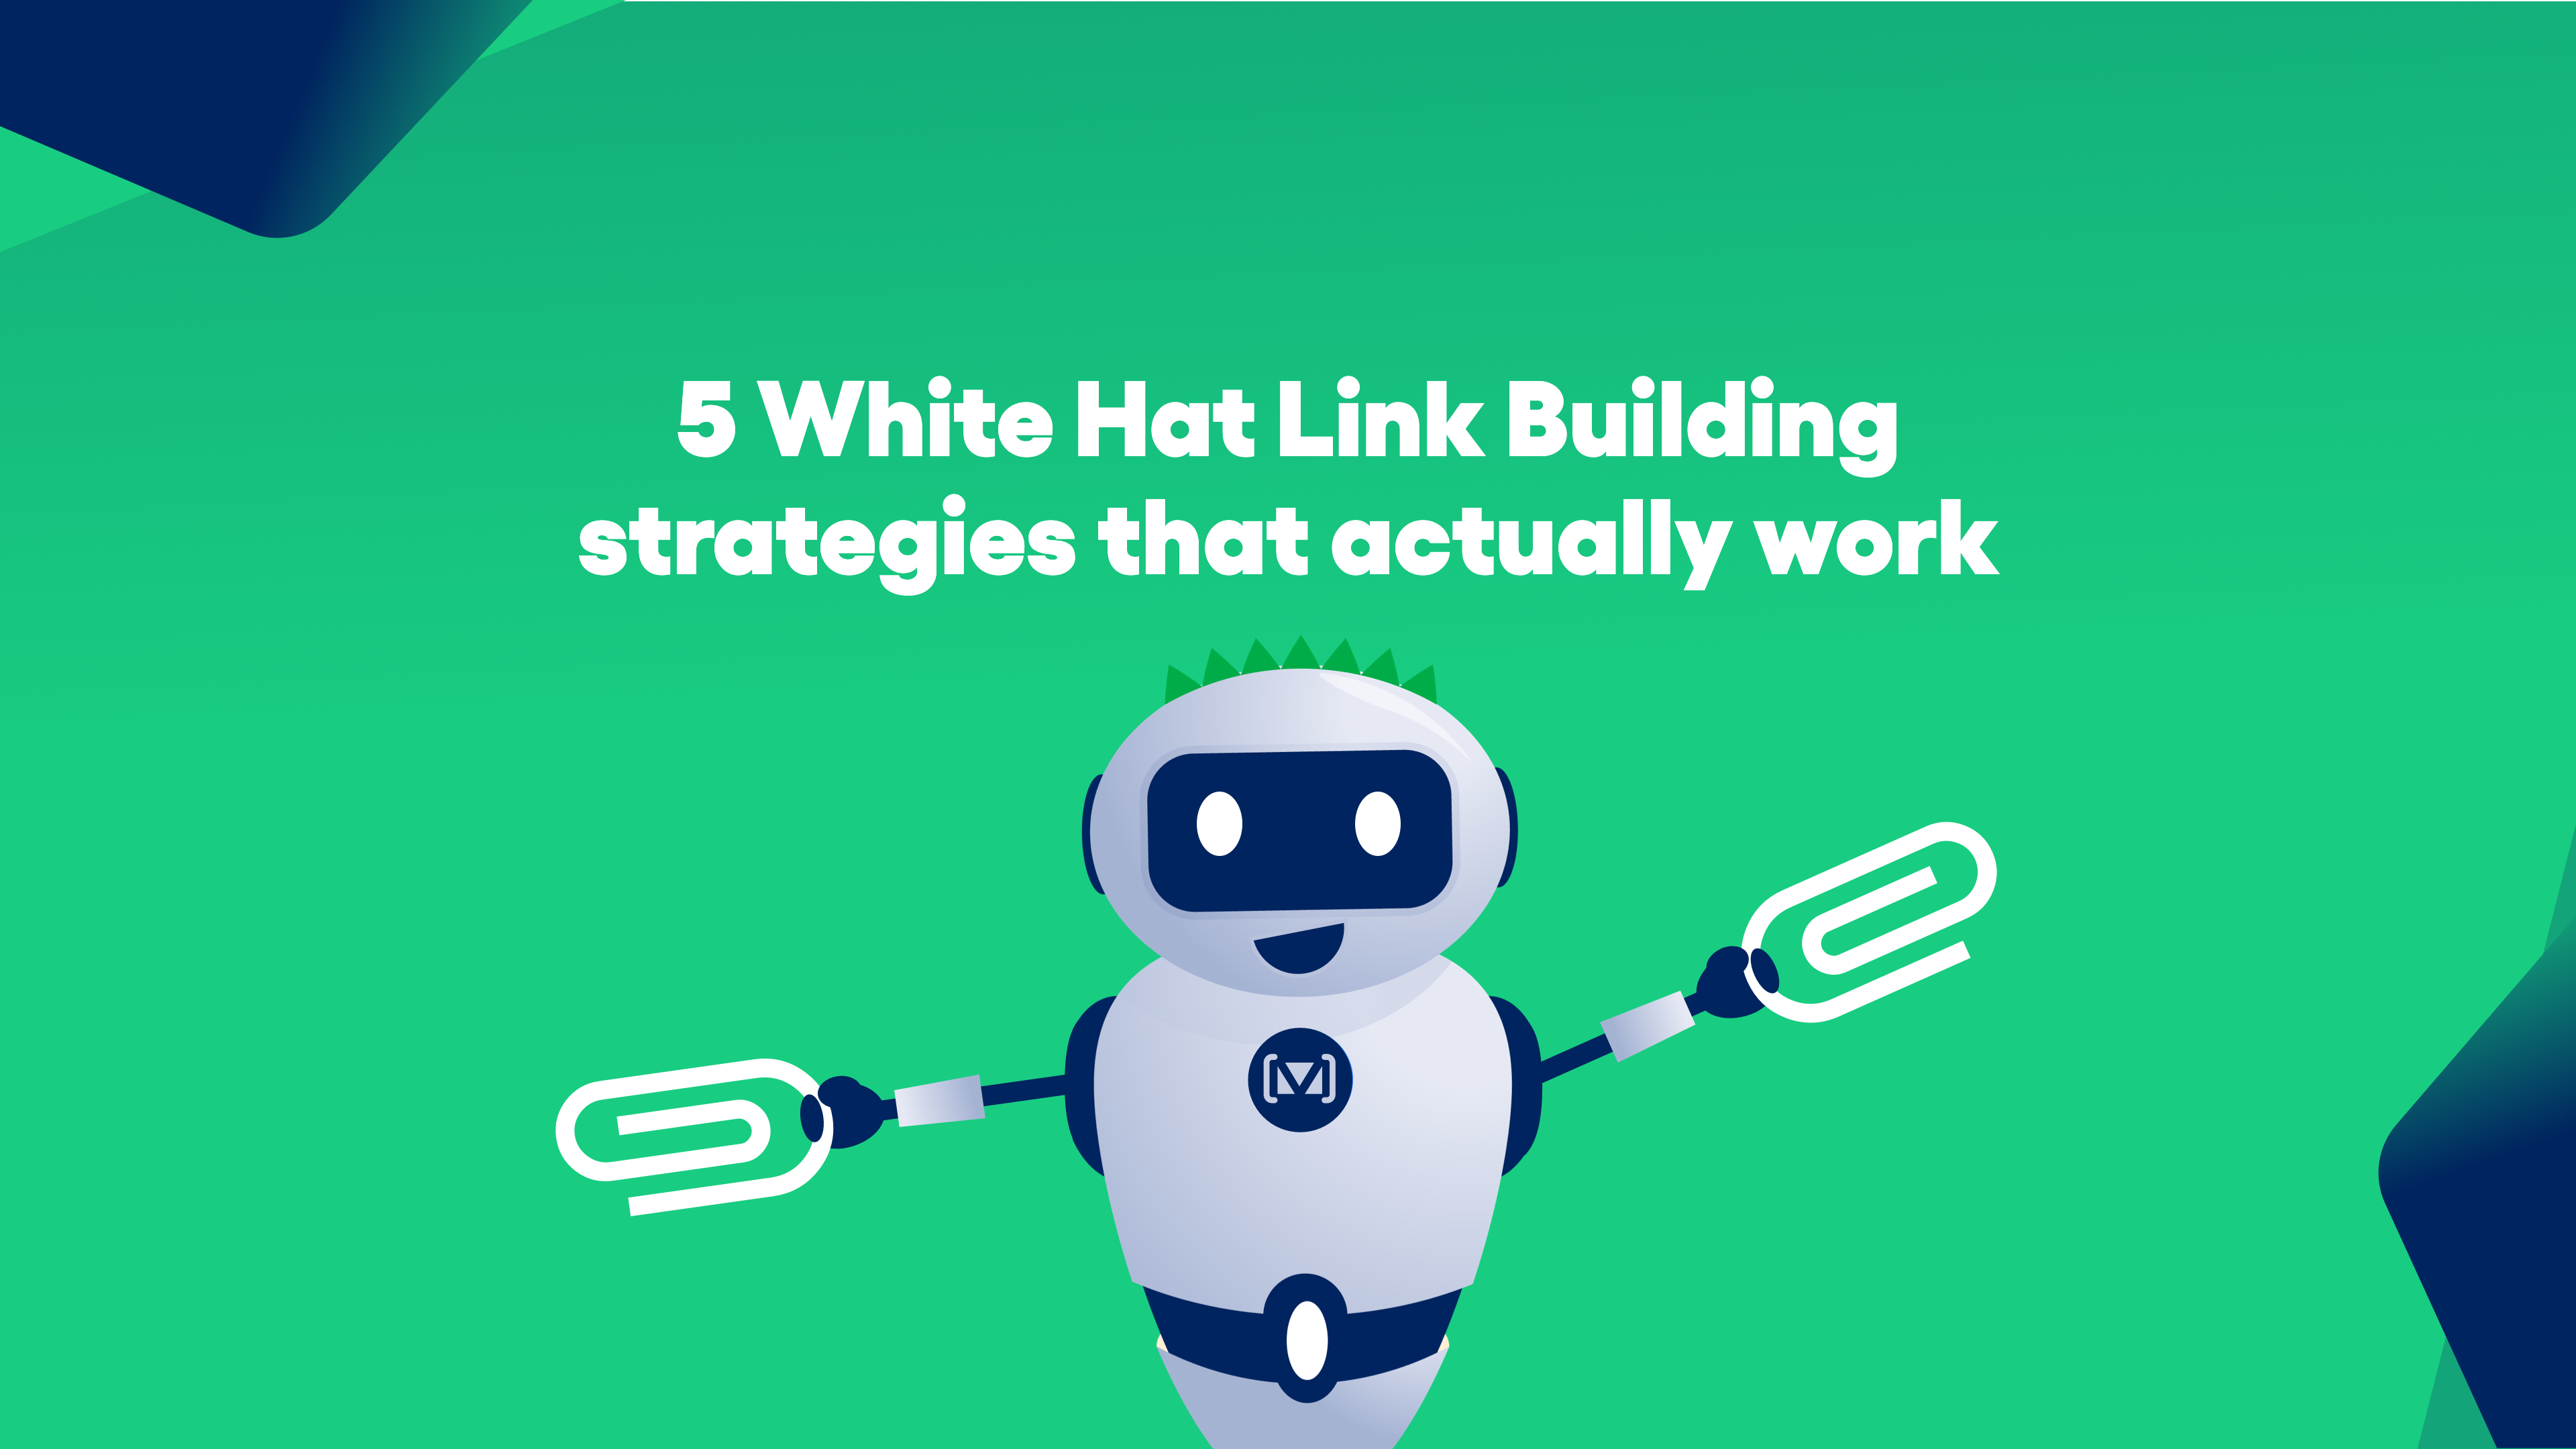 White Hat Link Building Strategies: Boost Your Website's Authority